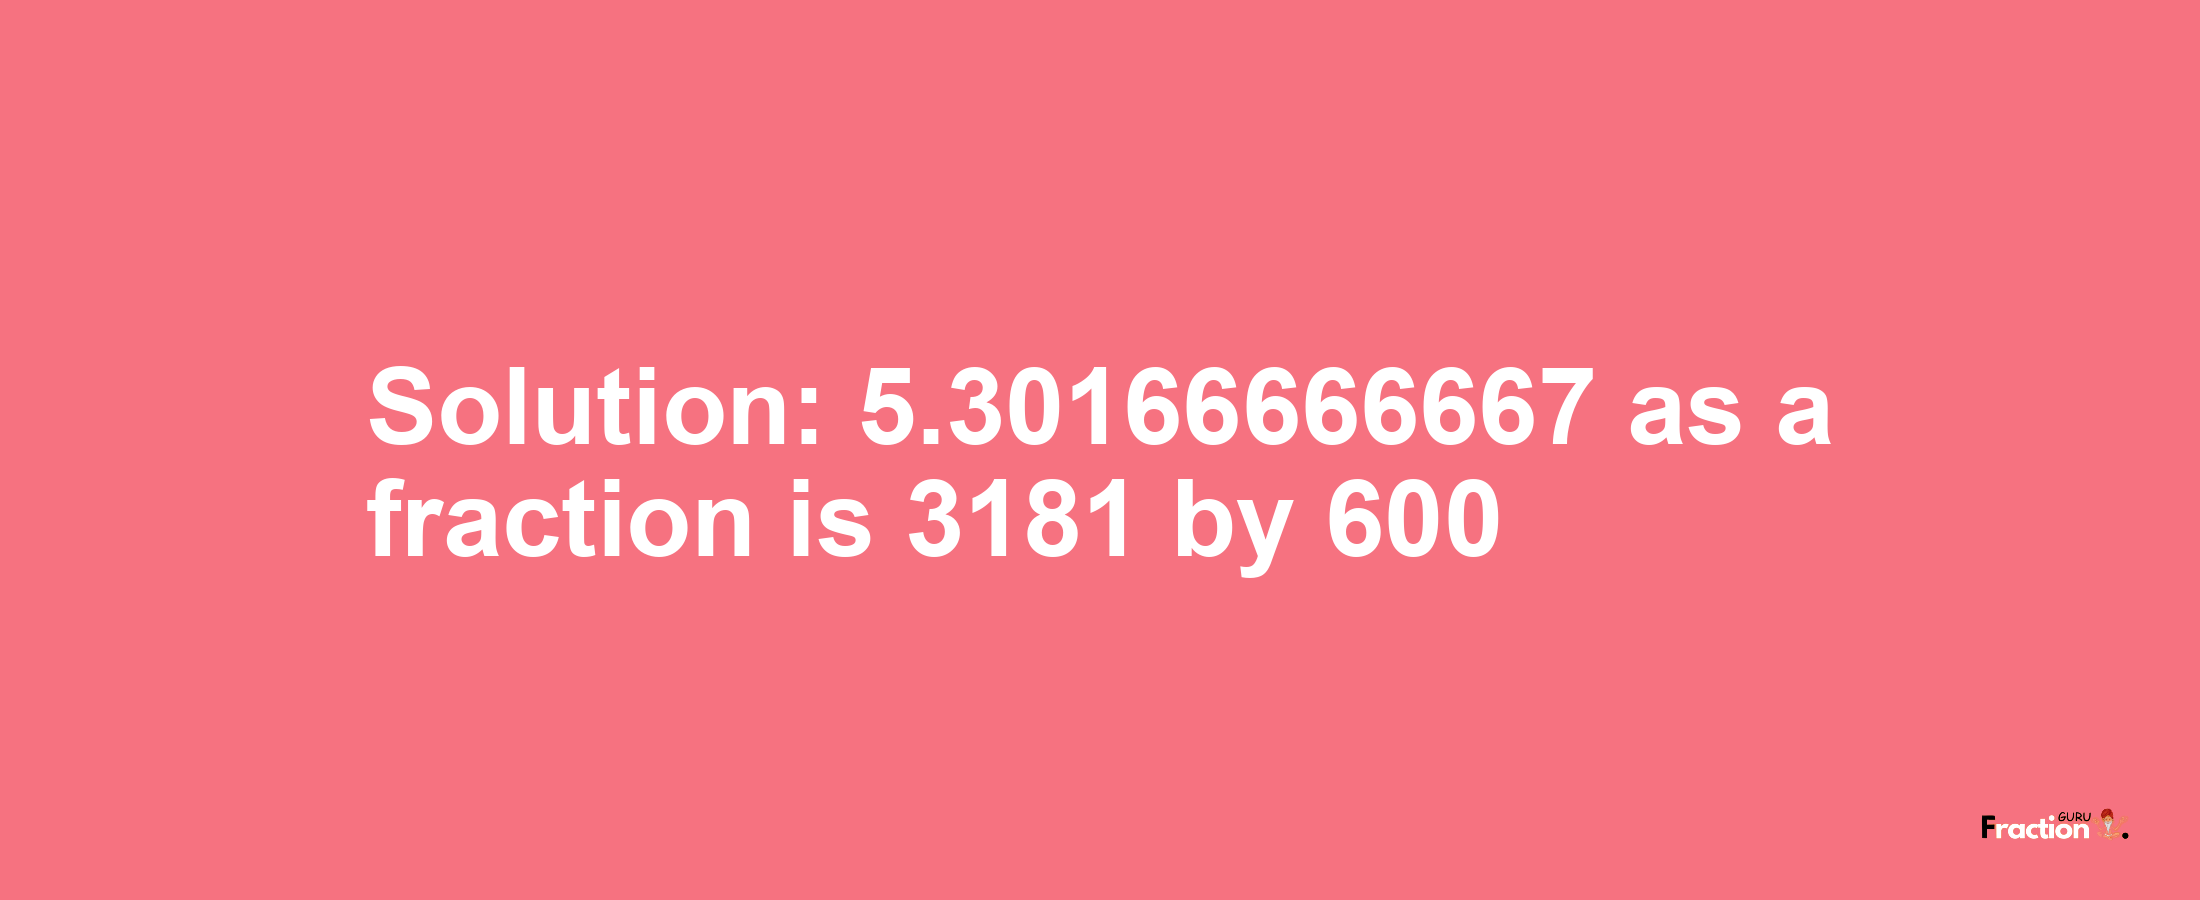 Solution:5.30166666667 as a fraction is 3181/600